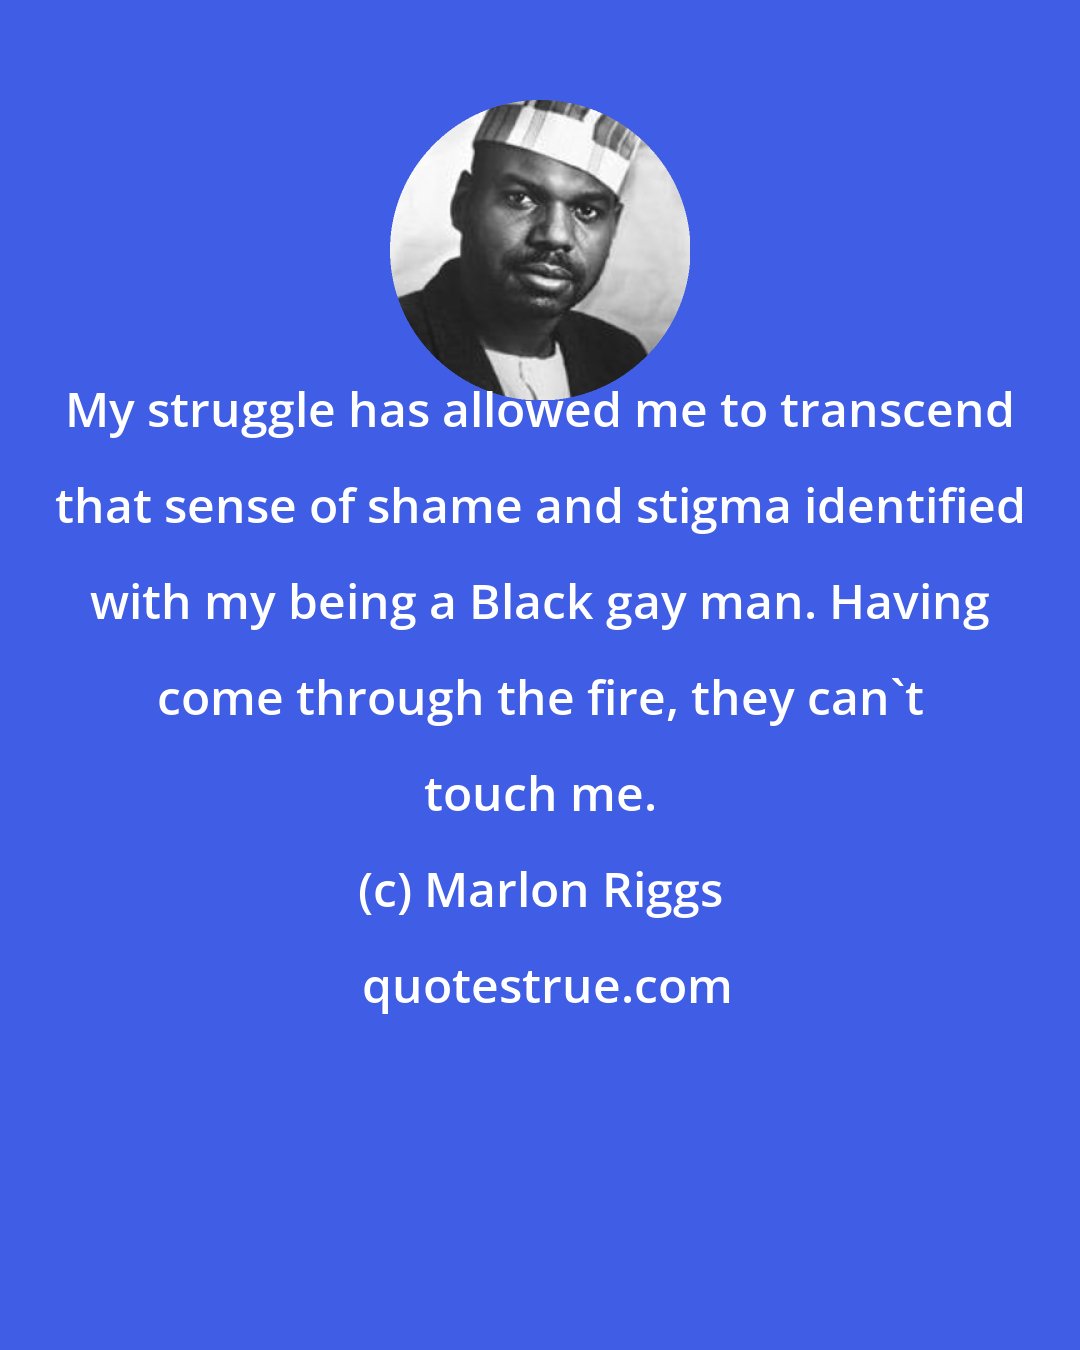 Marlon Riggs: My struggle has allowed me to transcend that sense of shame and stigma identified with my being a Black gay man. Having come through the fire, they can't touch me.